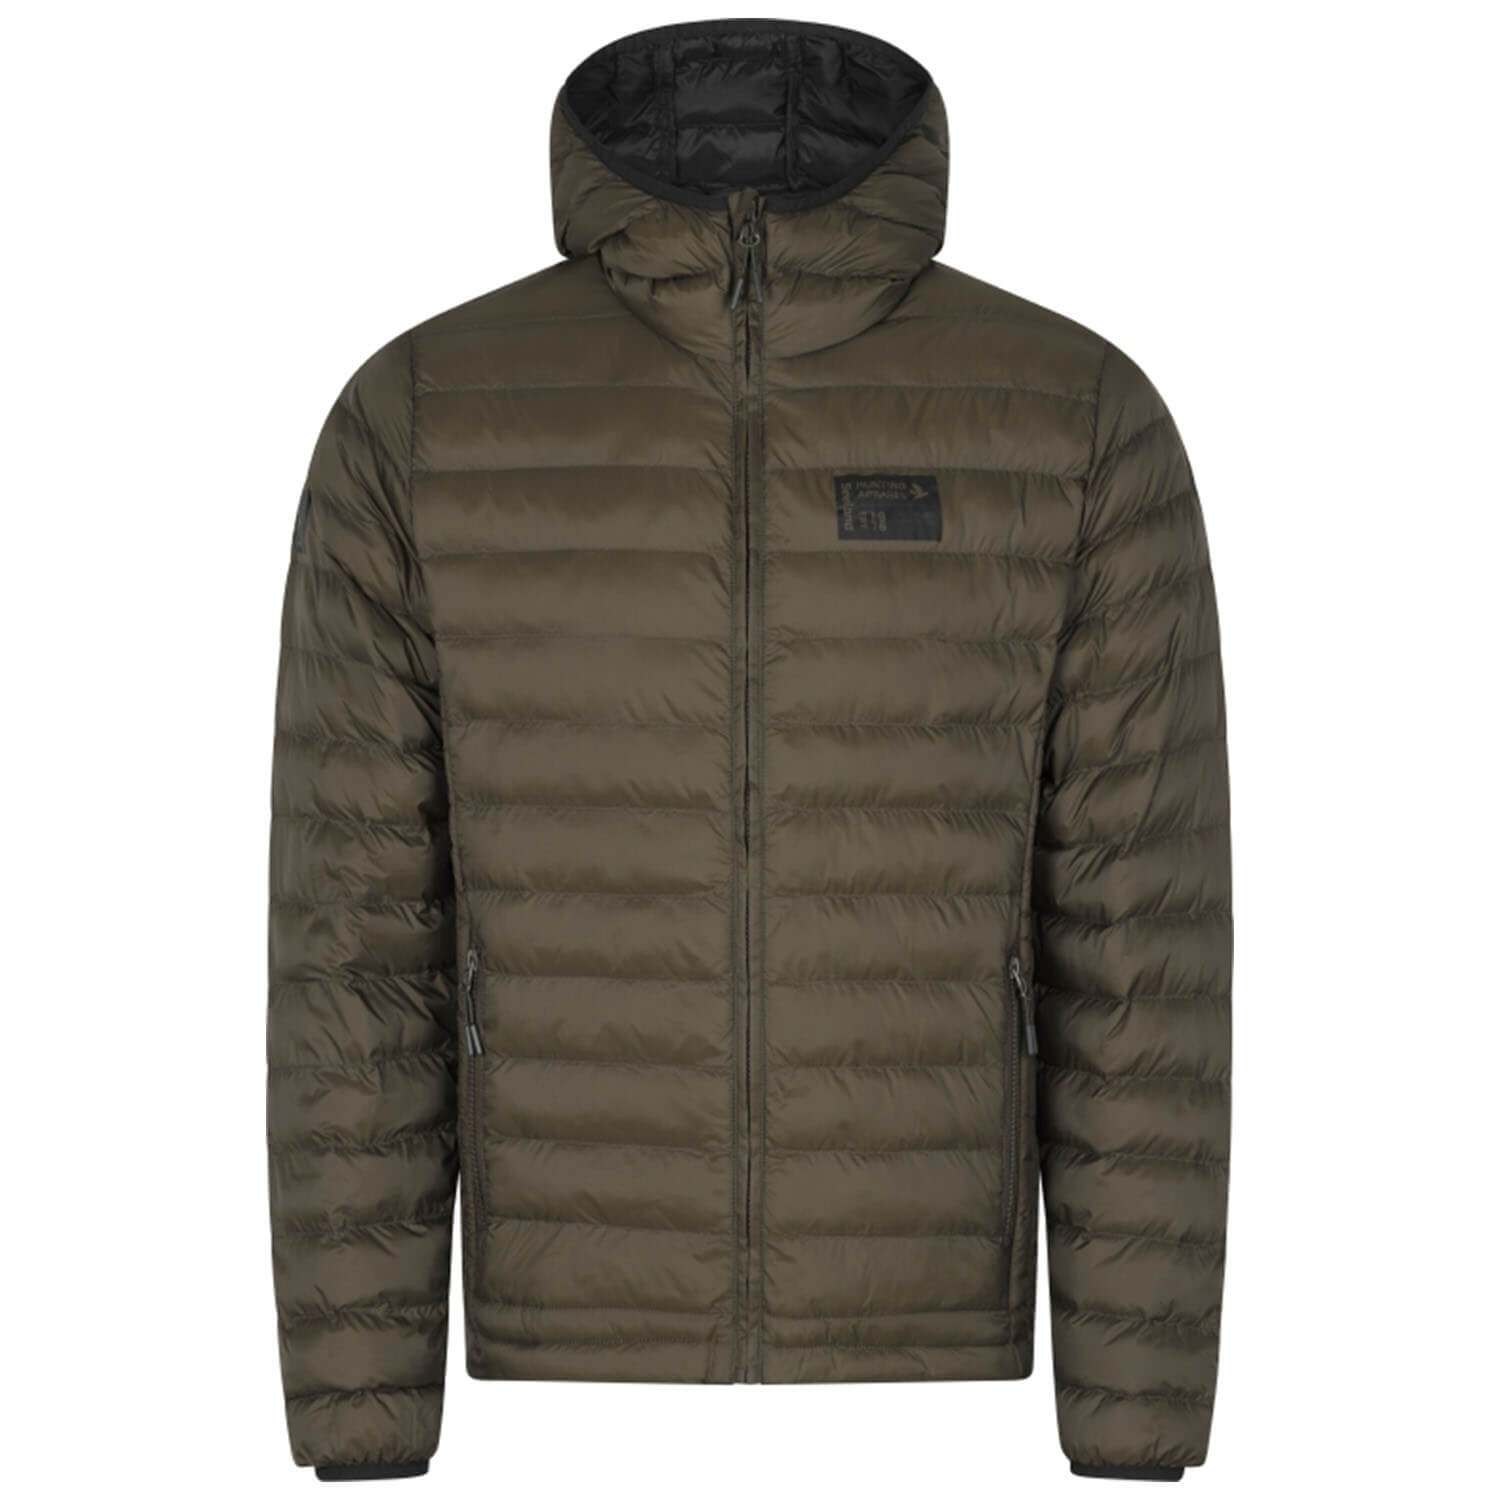 Seeland quilted jacket fahrenheit (Light Pine) - Mountain Hunting